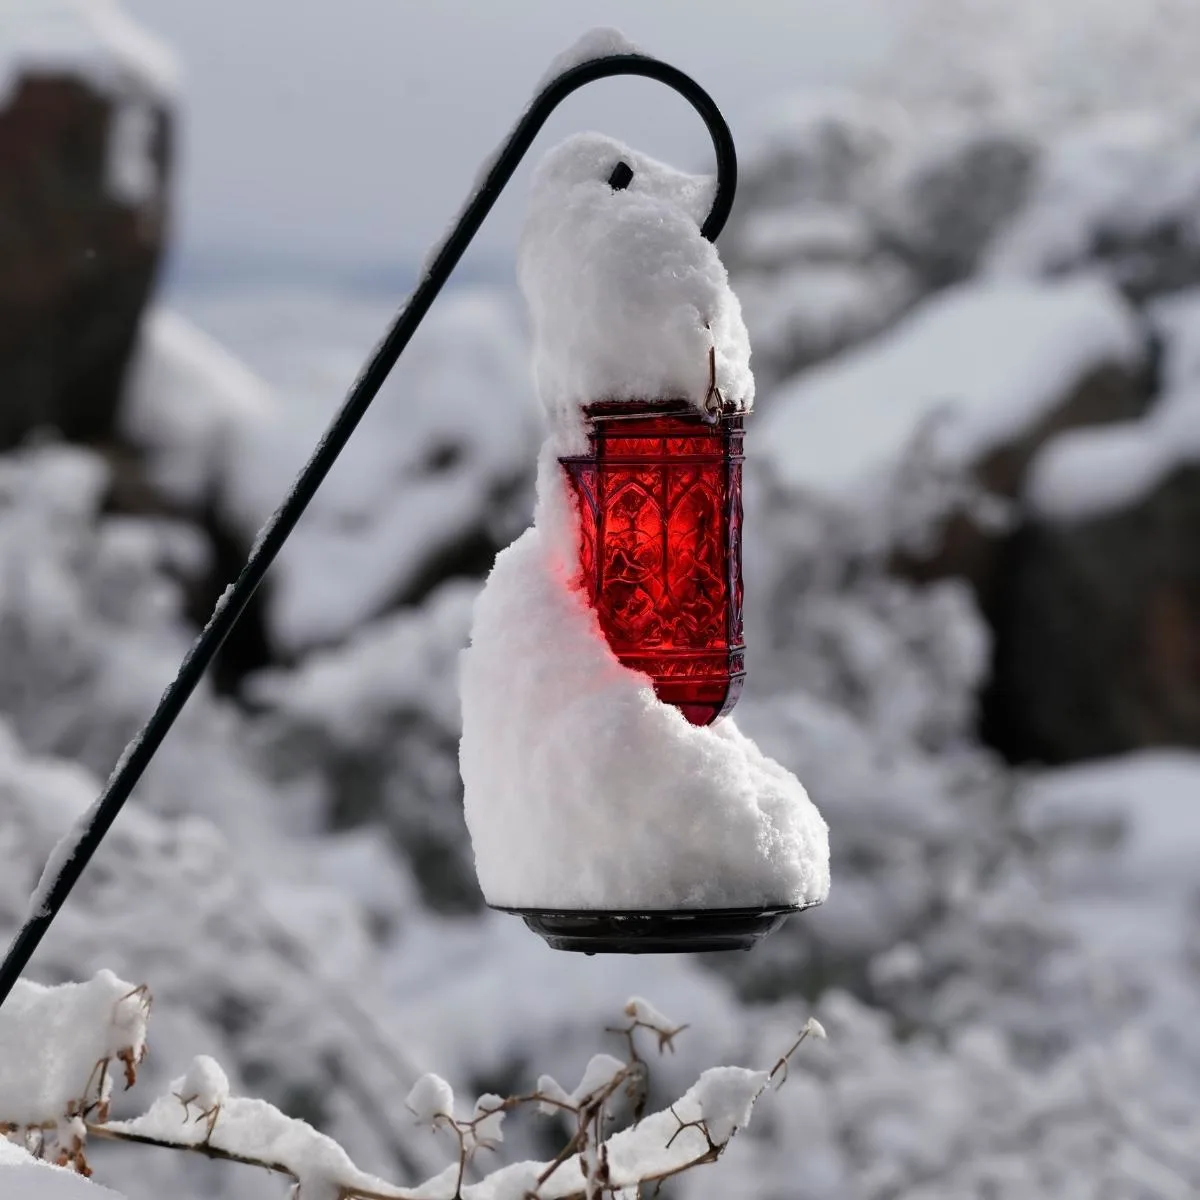 hummingbird feeder covered in snow